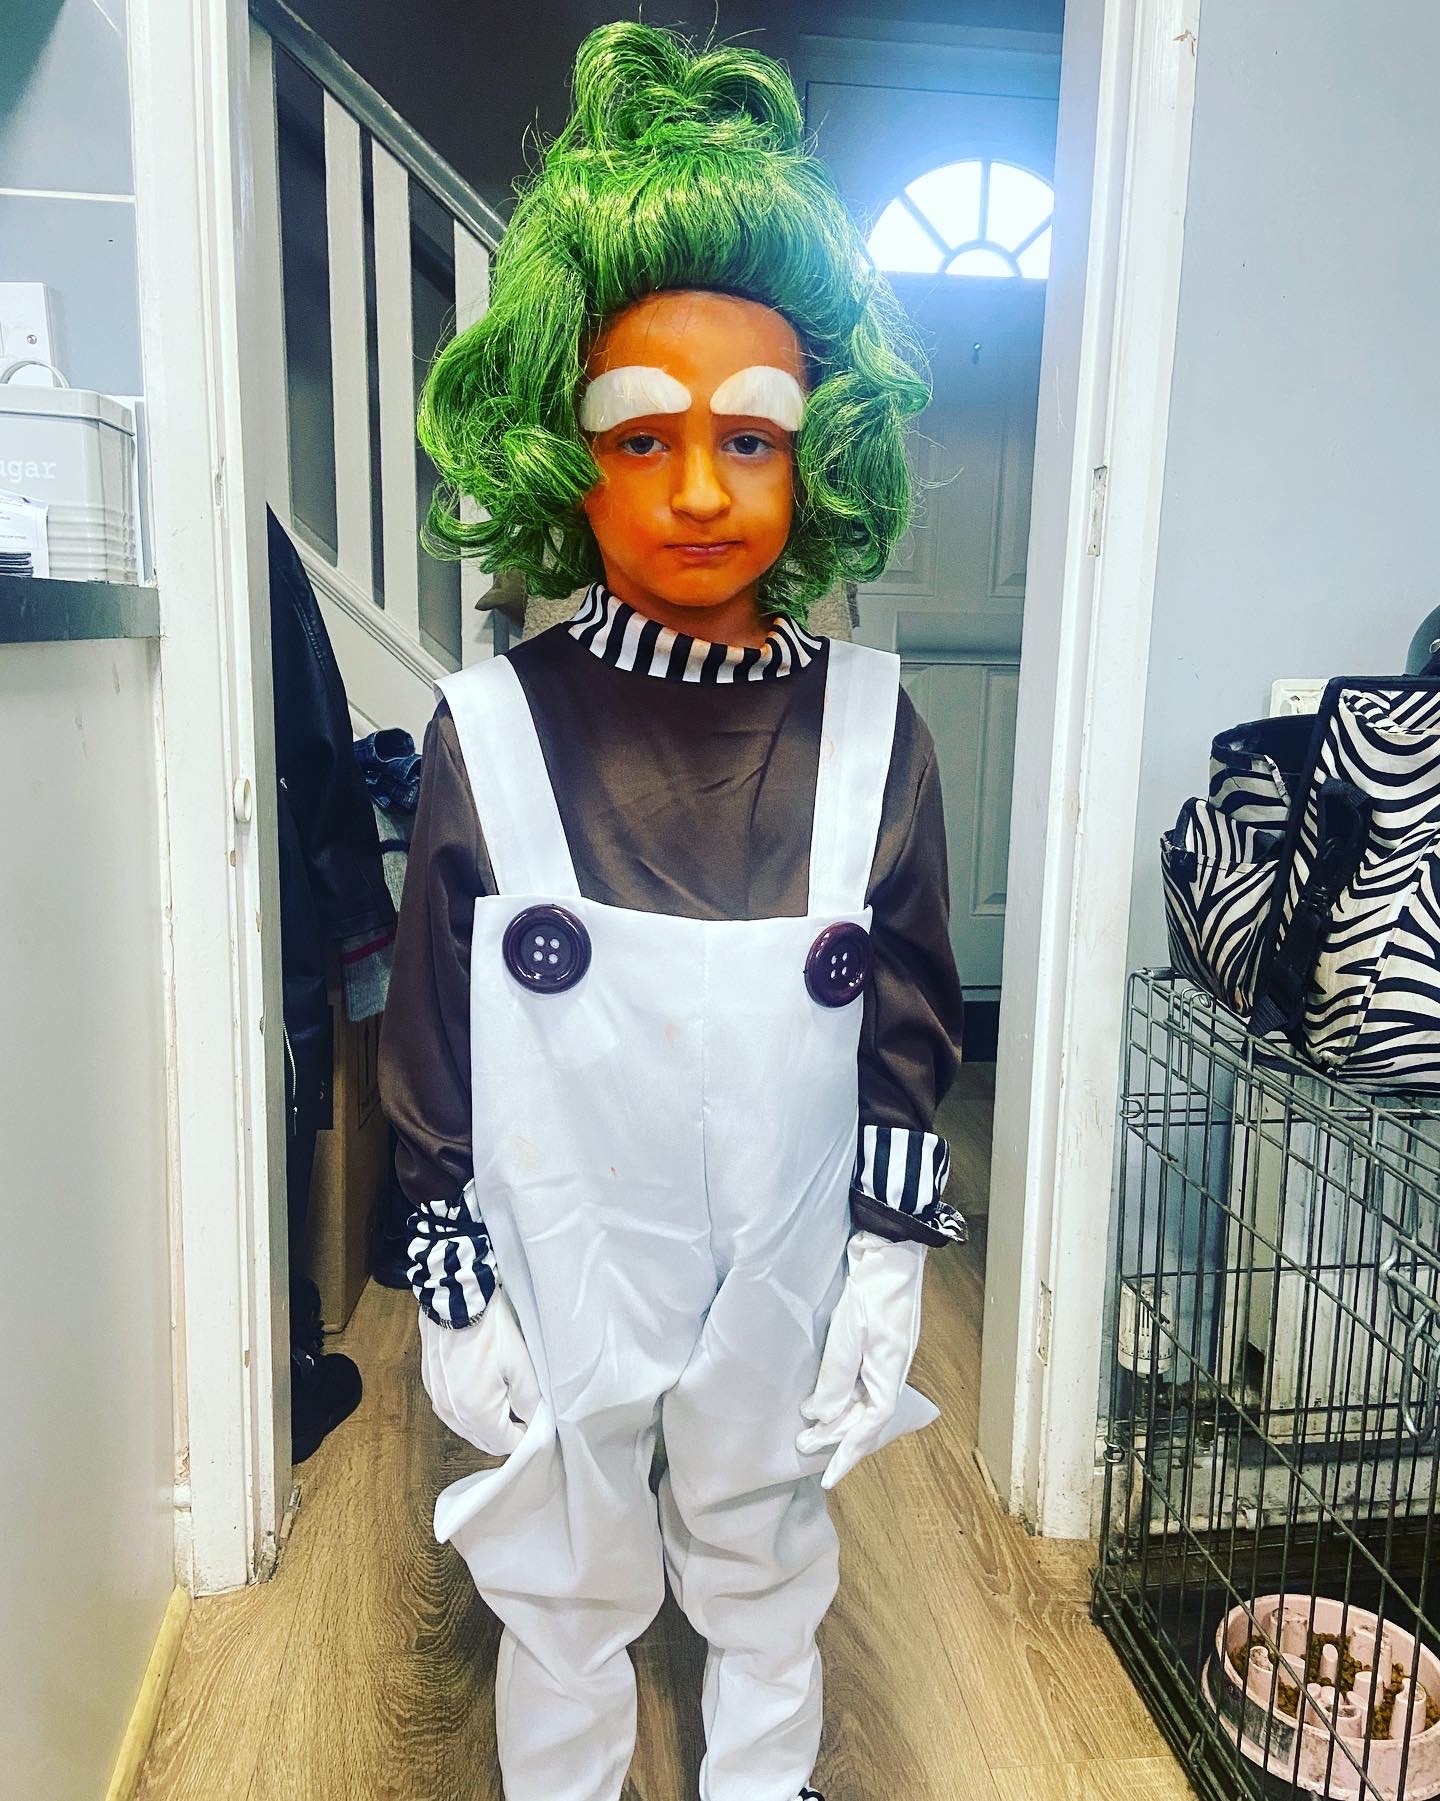 Shared by Amy Gill: Freddie, at St David’s Catholic Primary School, Mold. He’s severely epileptic and managed to have a good day to take part in World Book Day dressed as an Oompa Loompa Charlie and the Chocolate Factory.